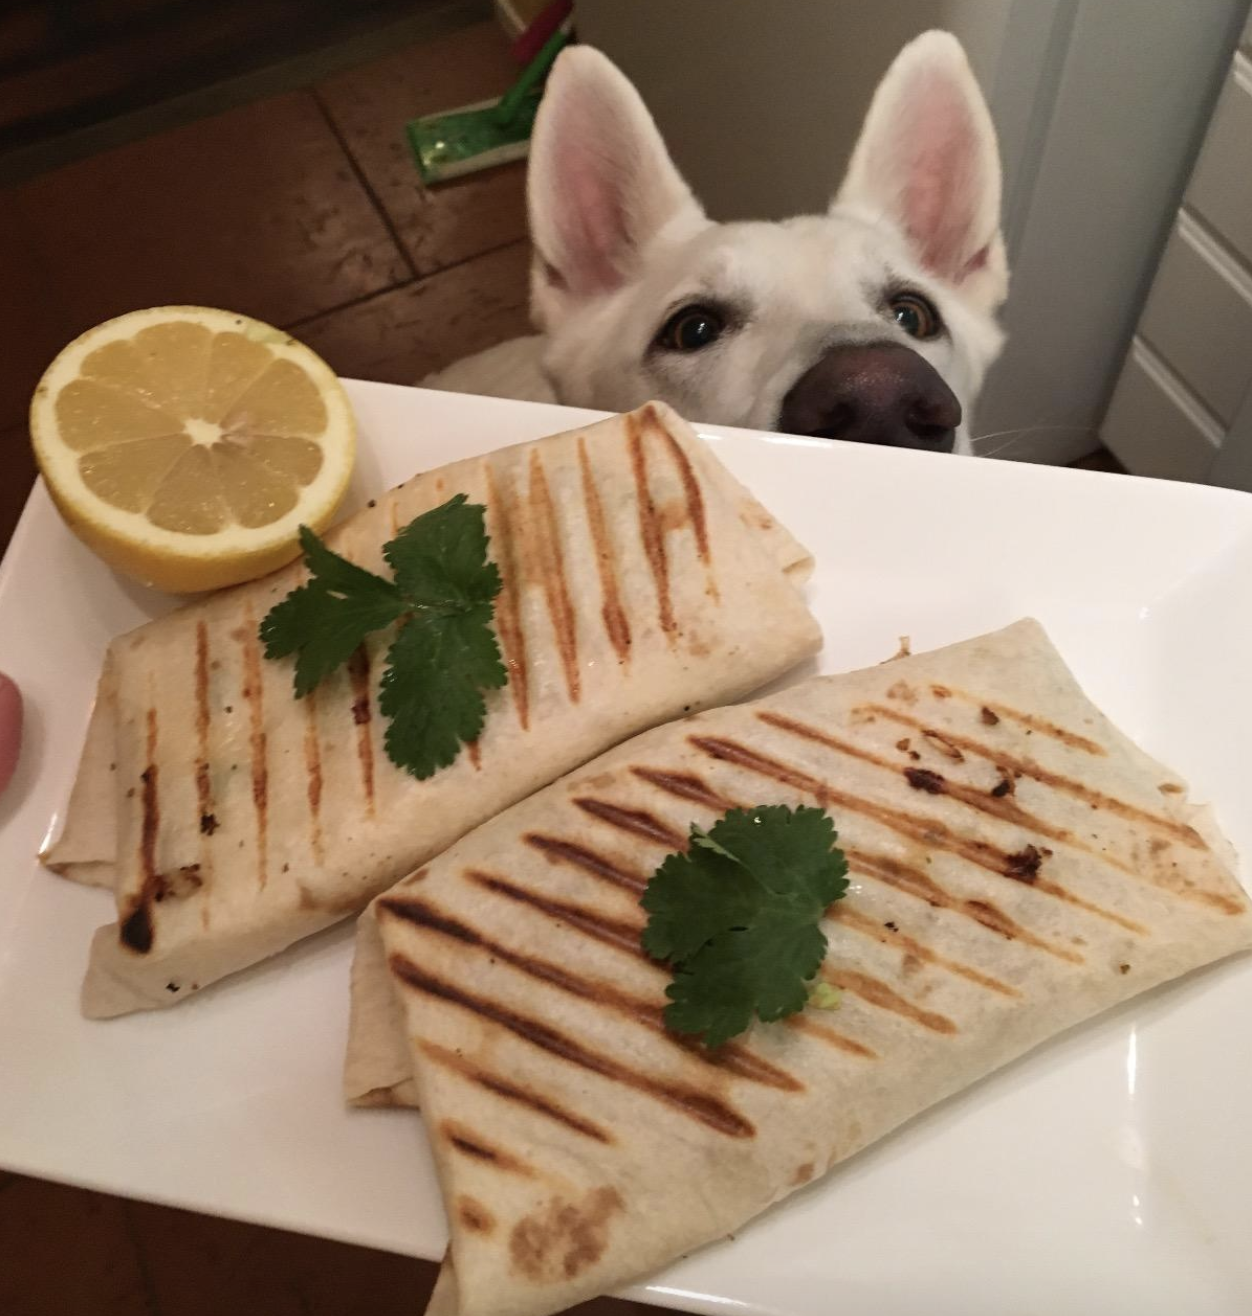 two panini halves with half lemon on the side and staring dog